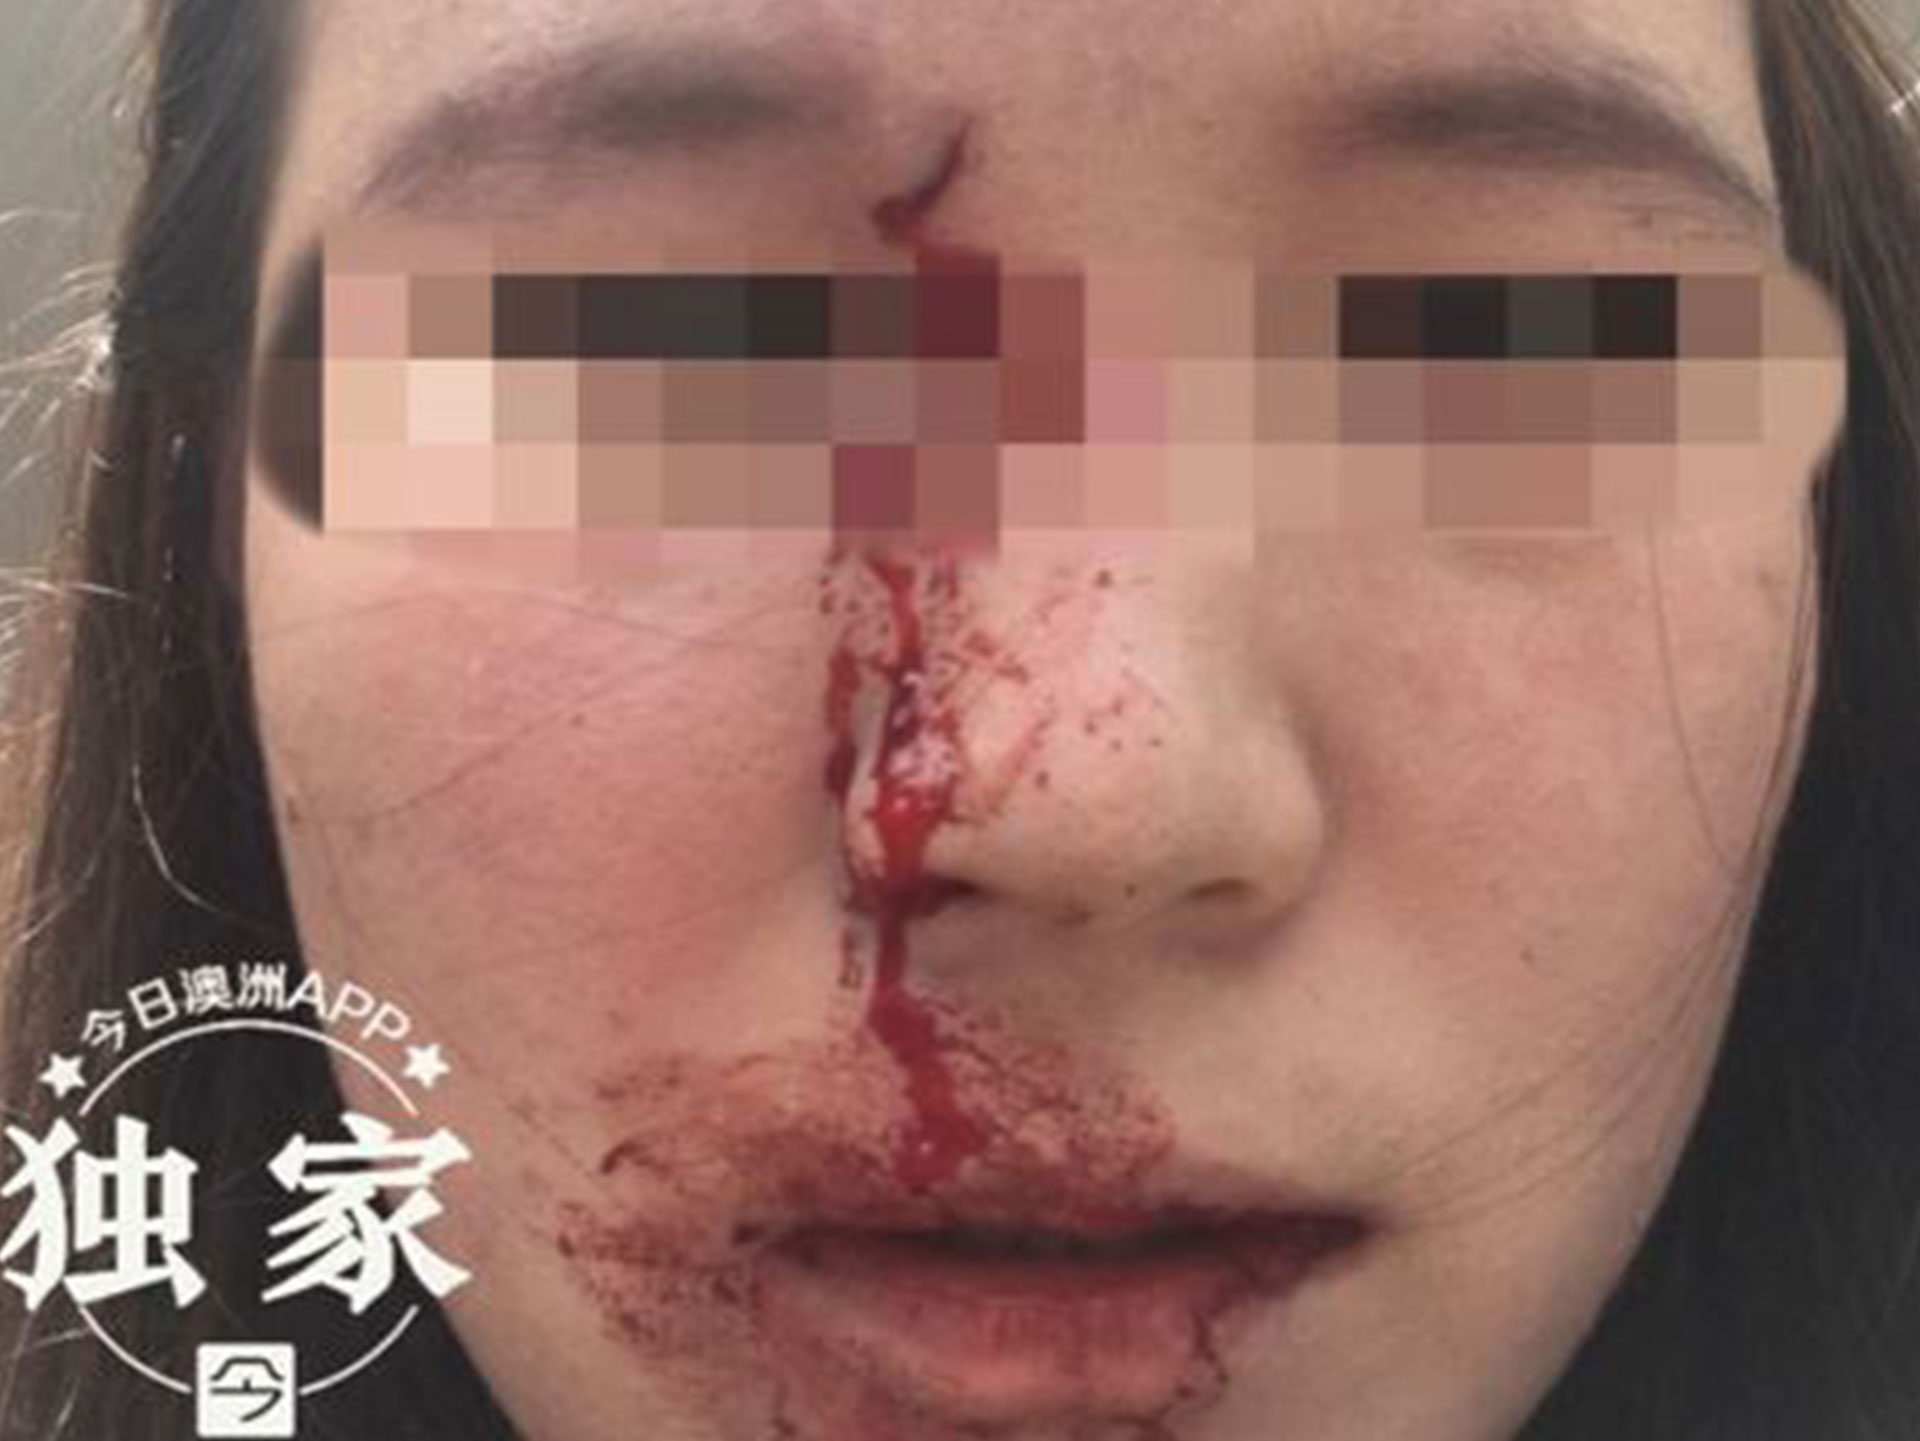 Chinese-Australian woman victim of racist attack in Sydney